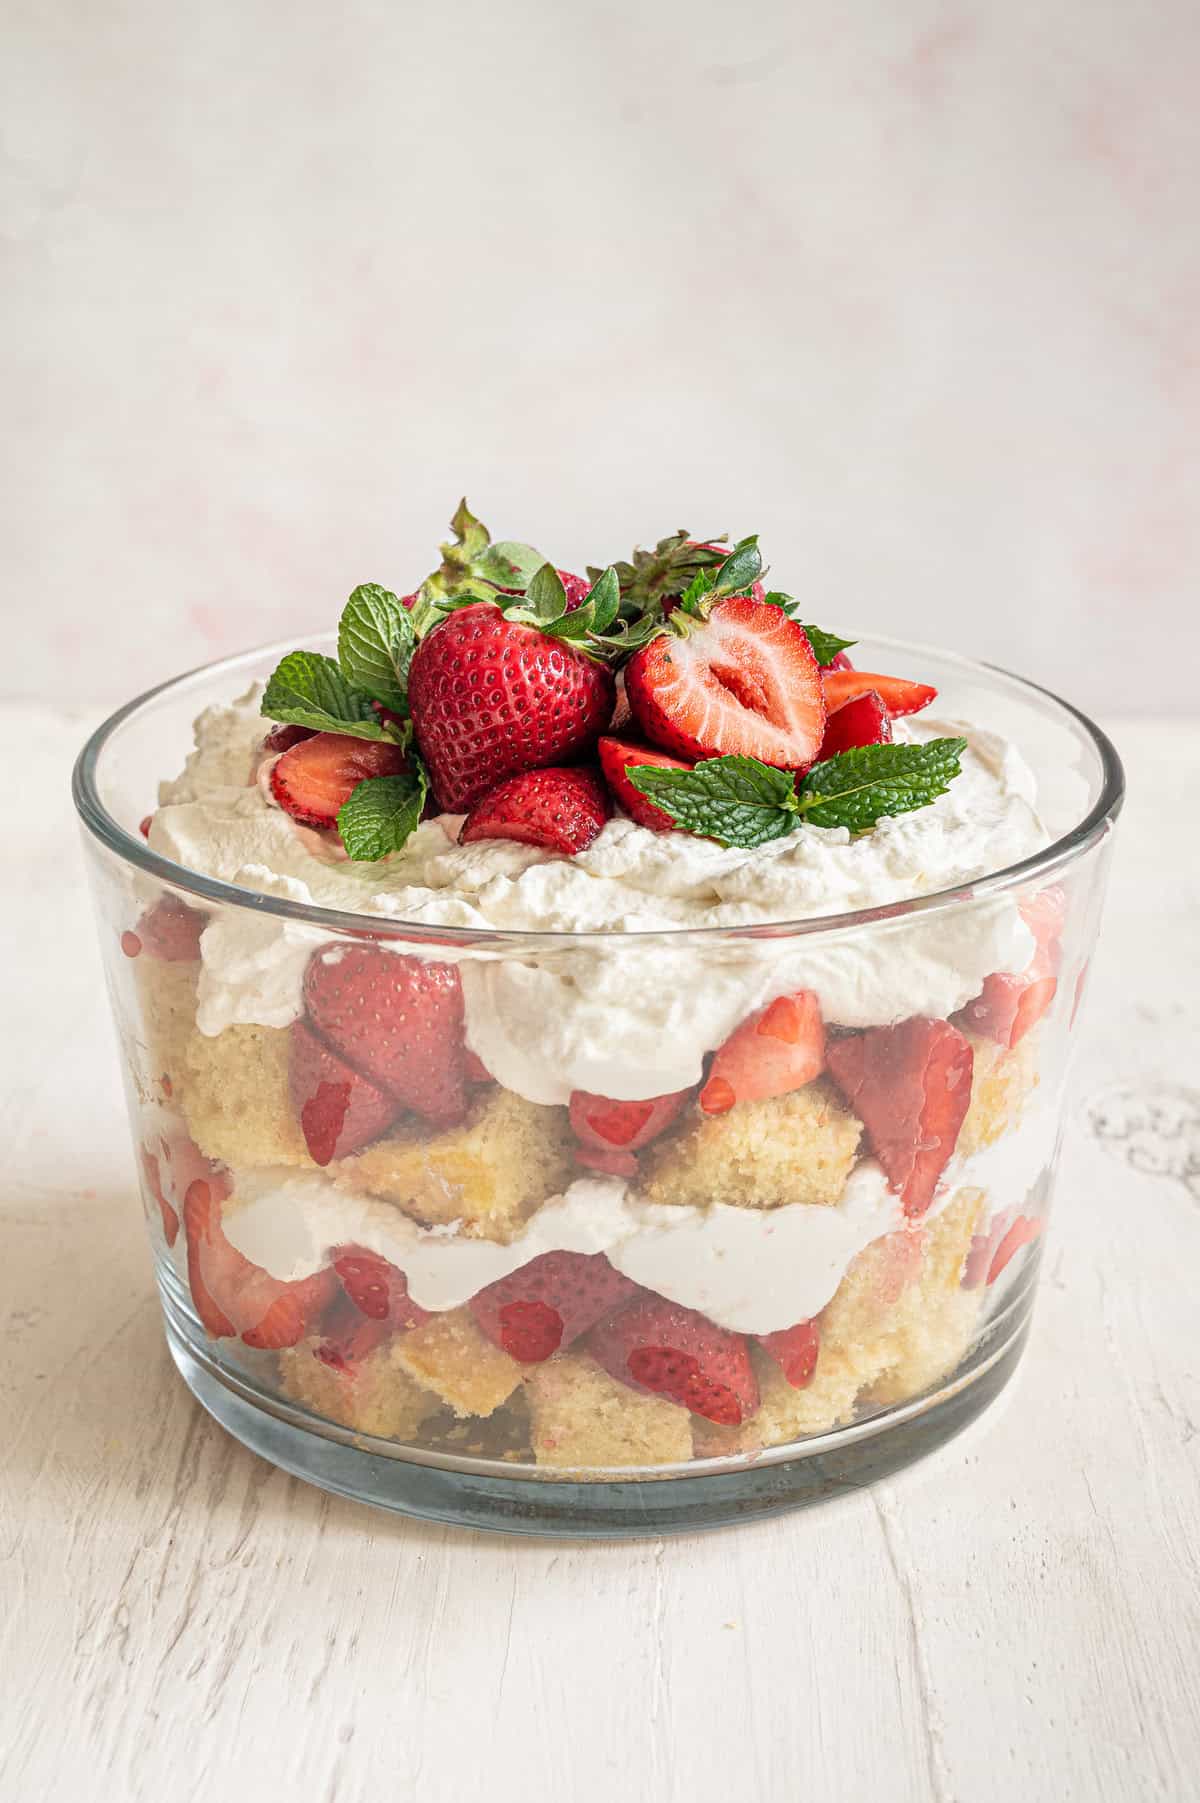 Strawberry shortcake trifle with whole and sliced strawberries and fresh mint leaves on top.